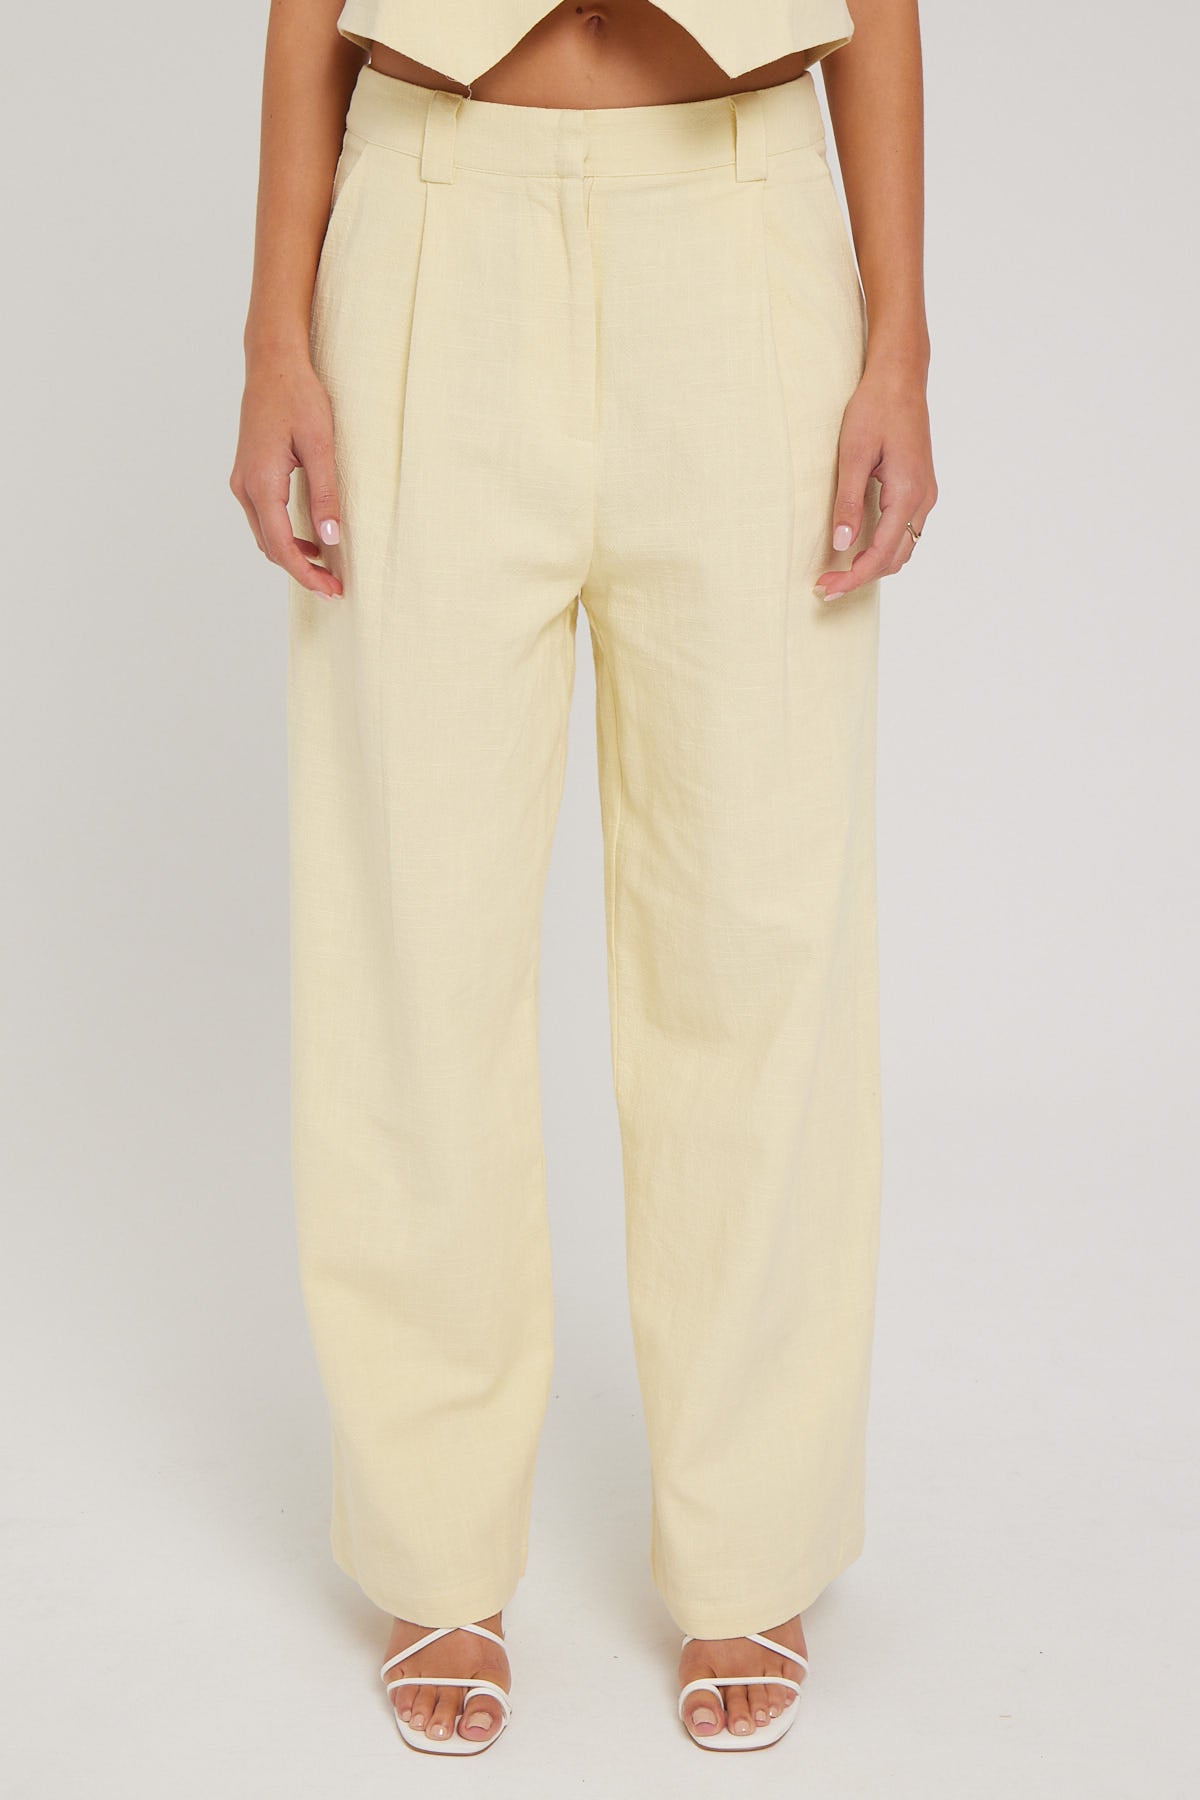 Lioness Leo Pant Butter – Universal Store